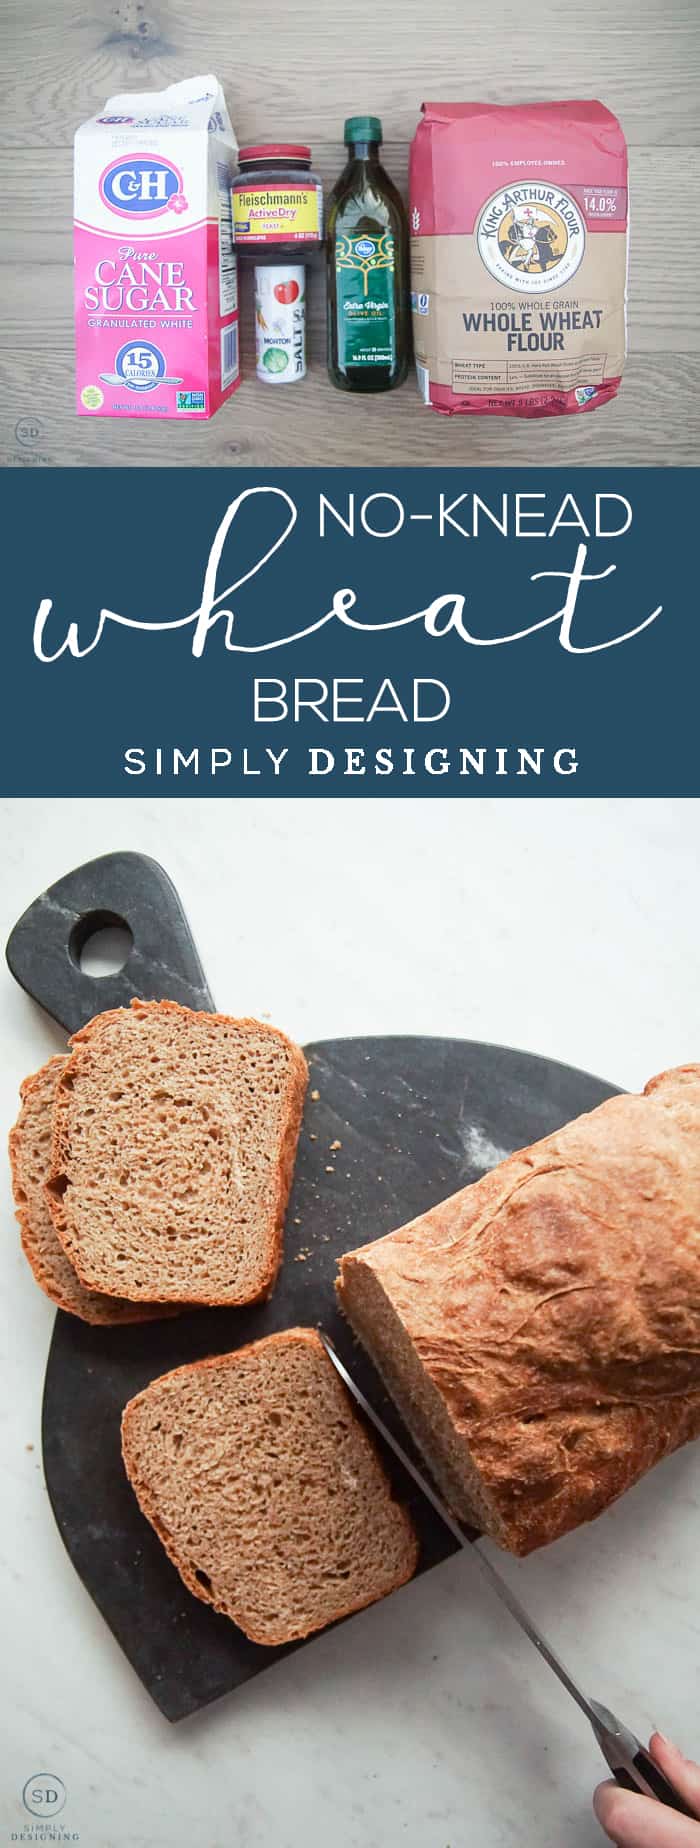 This Whole Wheat No Knead Bread is so simple to make only takes about 5 minutes of hands-on time and is so light fluffy and delicious